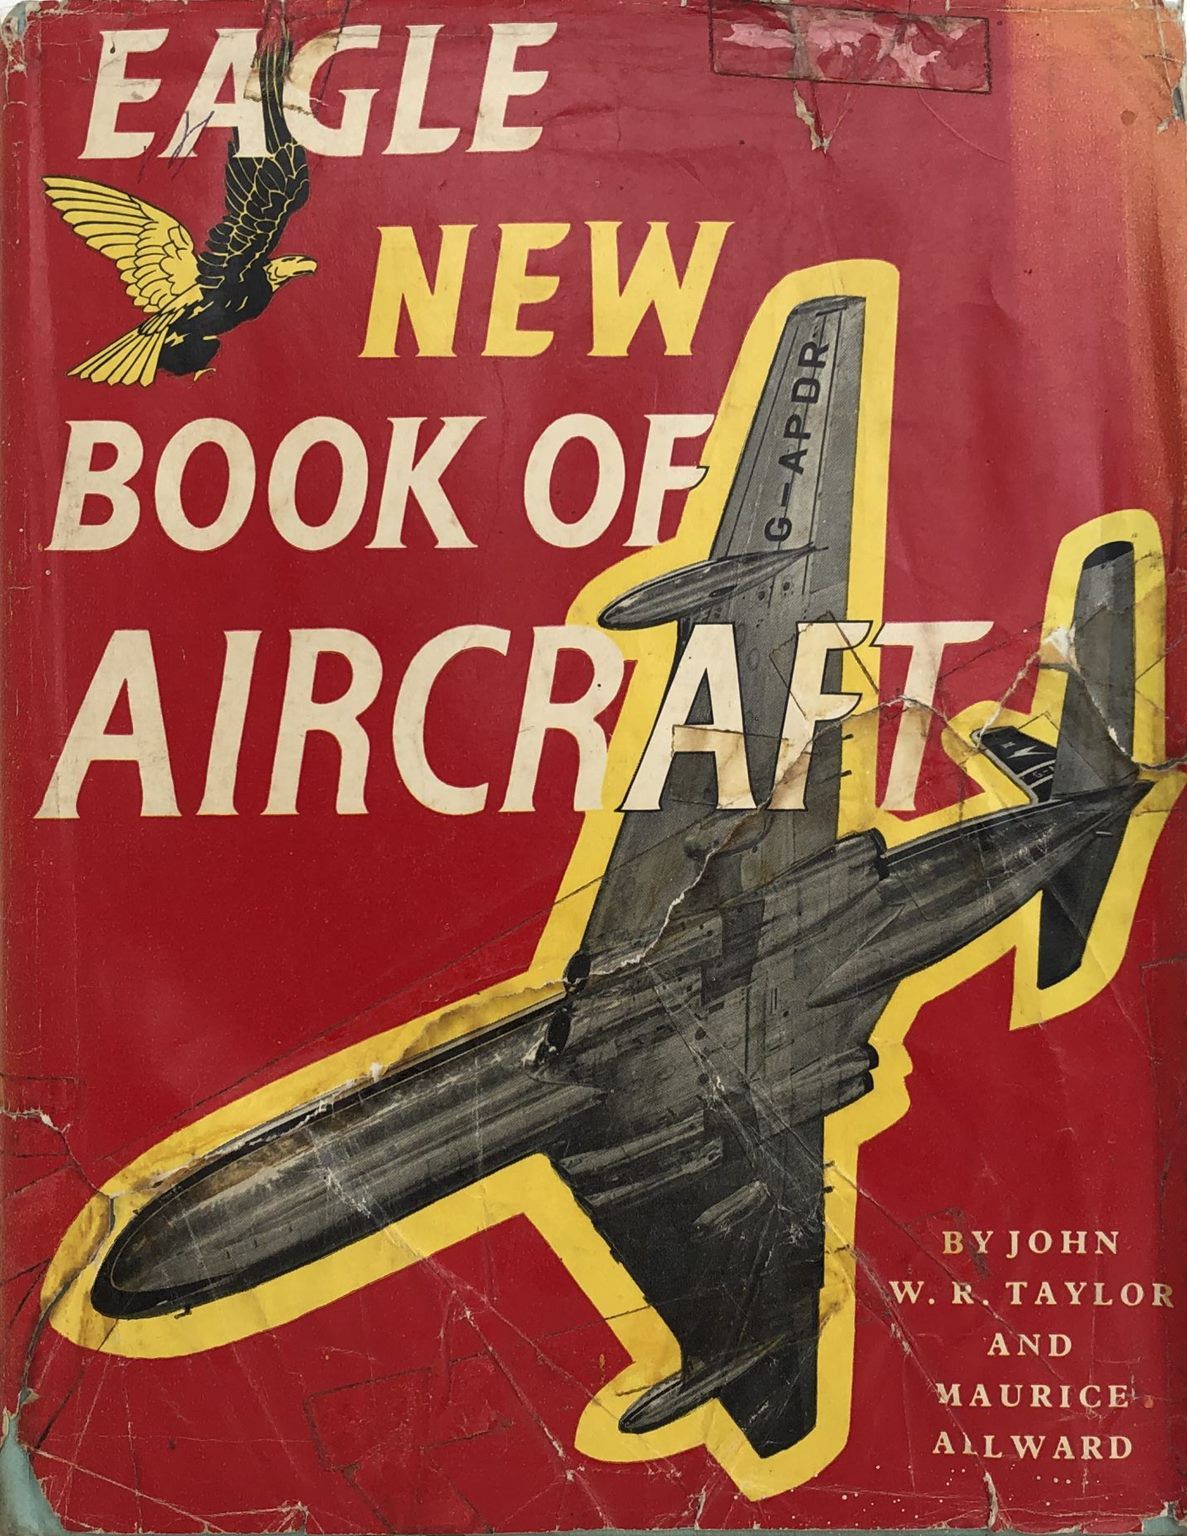 EAGLE NEW BOOK of AIRCRAFT